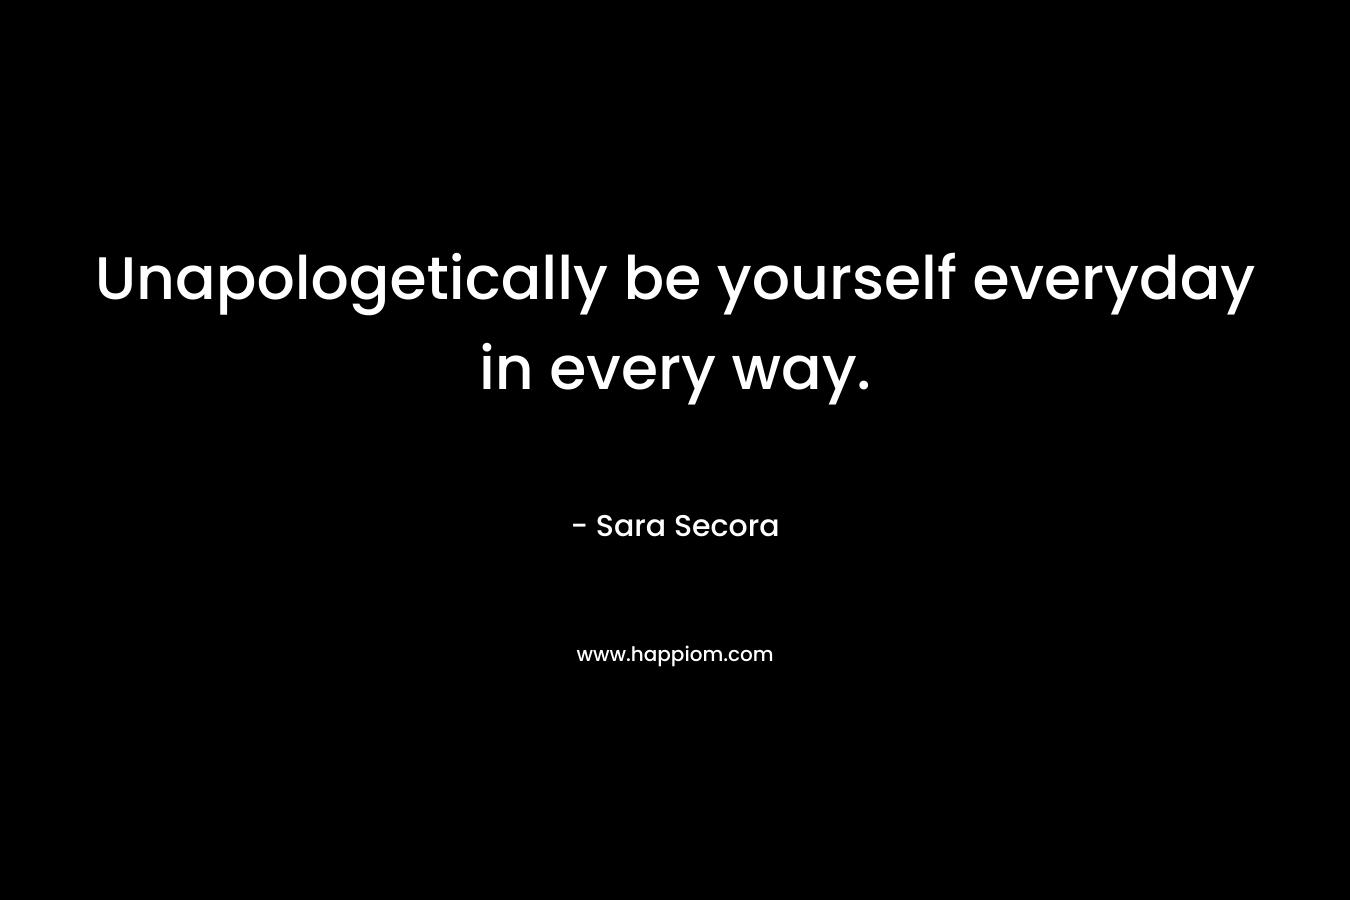 Unapologetically be yourself everyday in every way.